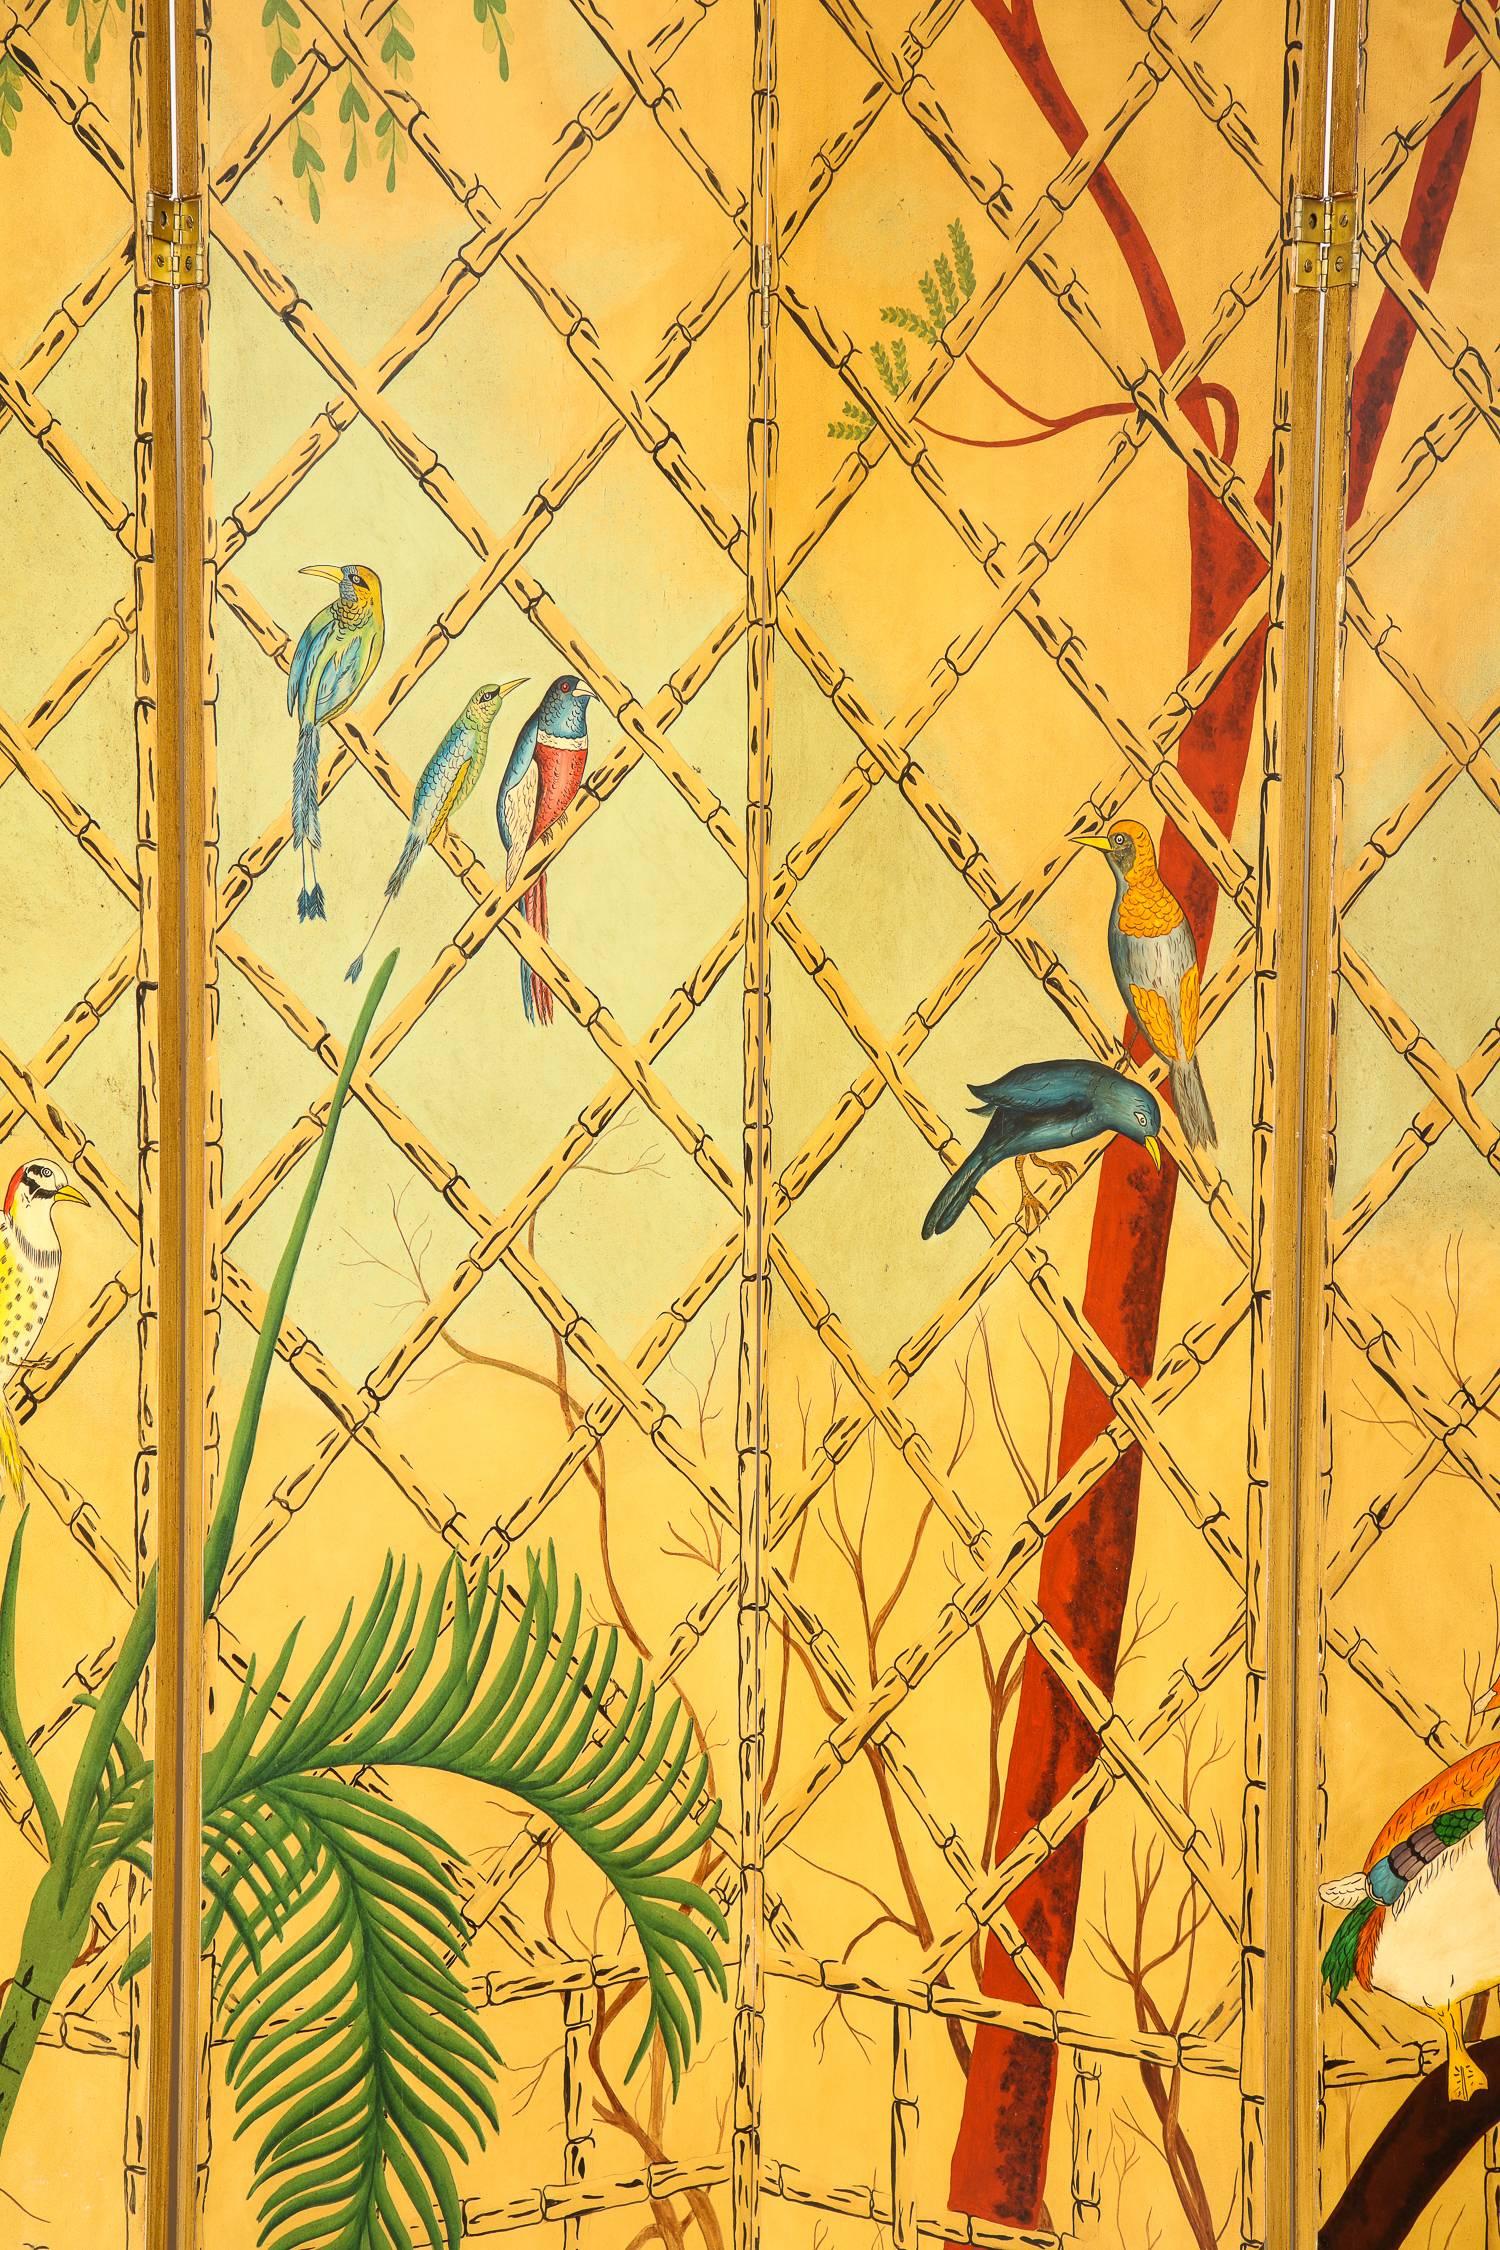 Massive chinoiserie six panel hand-painted screen room divider

Signed by Christian Fersen

Each panel is 16'' W x 1'' D and contains various hand-painted chinoiserie motifs with a continuous trellis design; includes brackets for wall mounting.